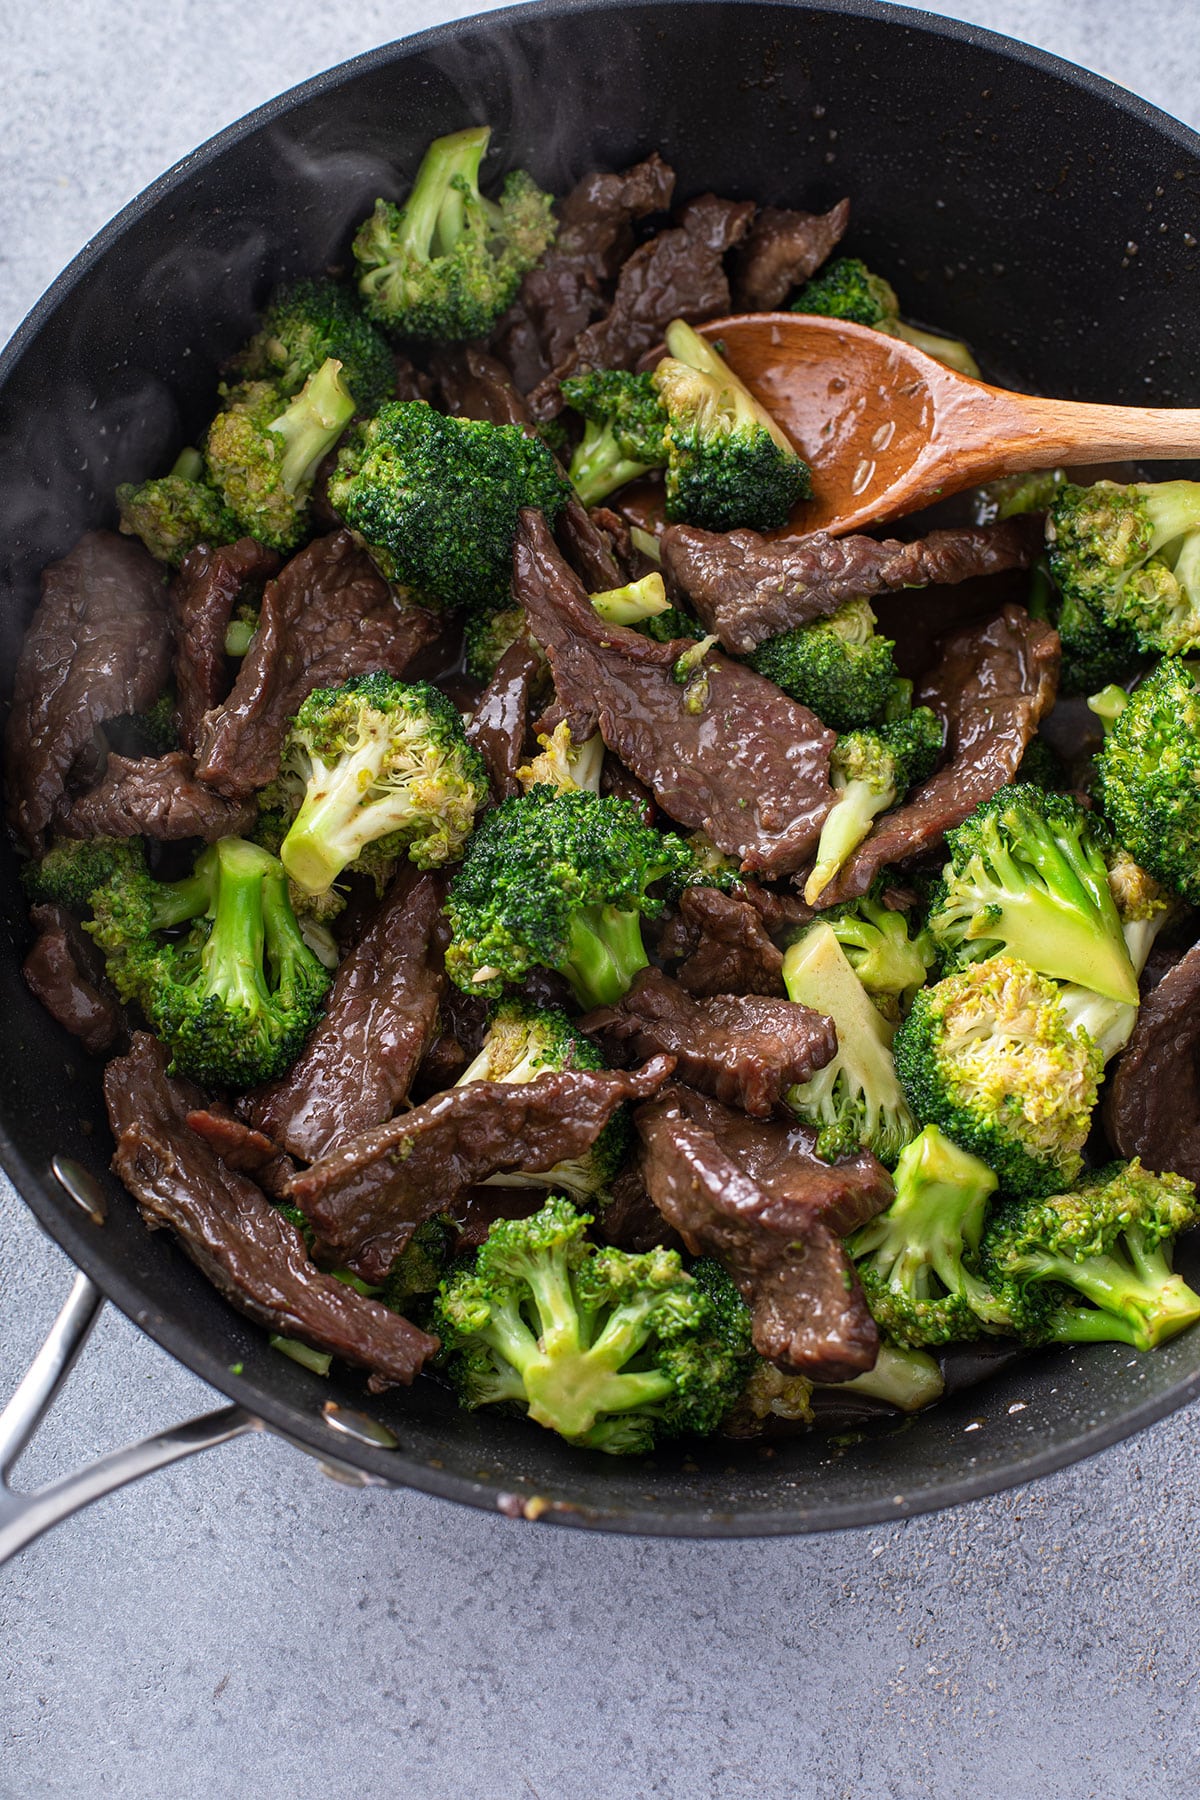 Juicy tender beef and broccoli in a wok.